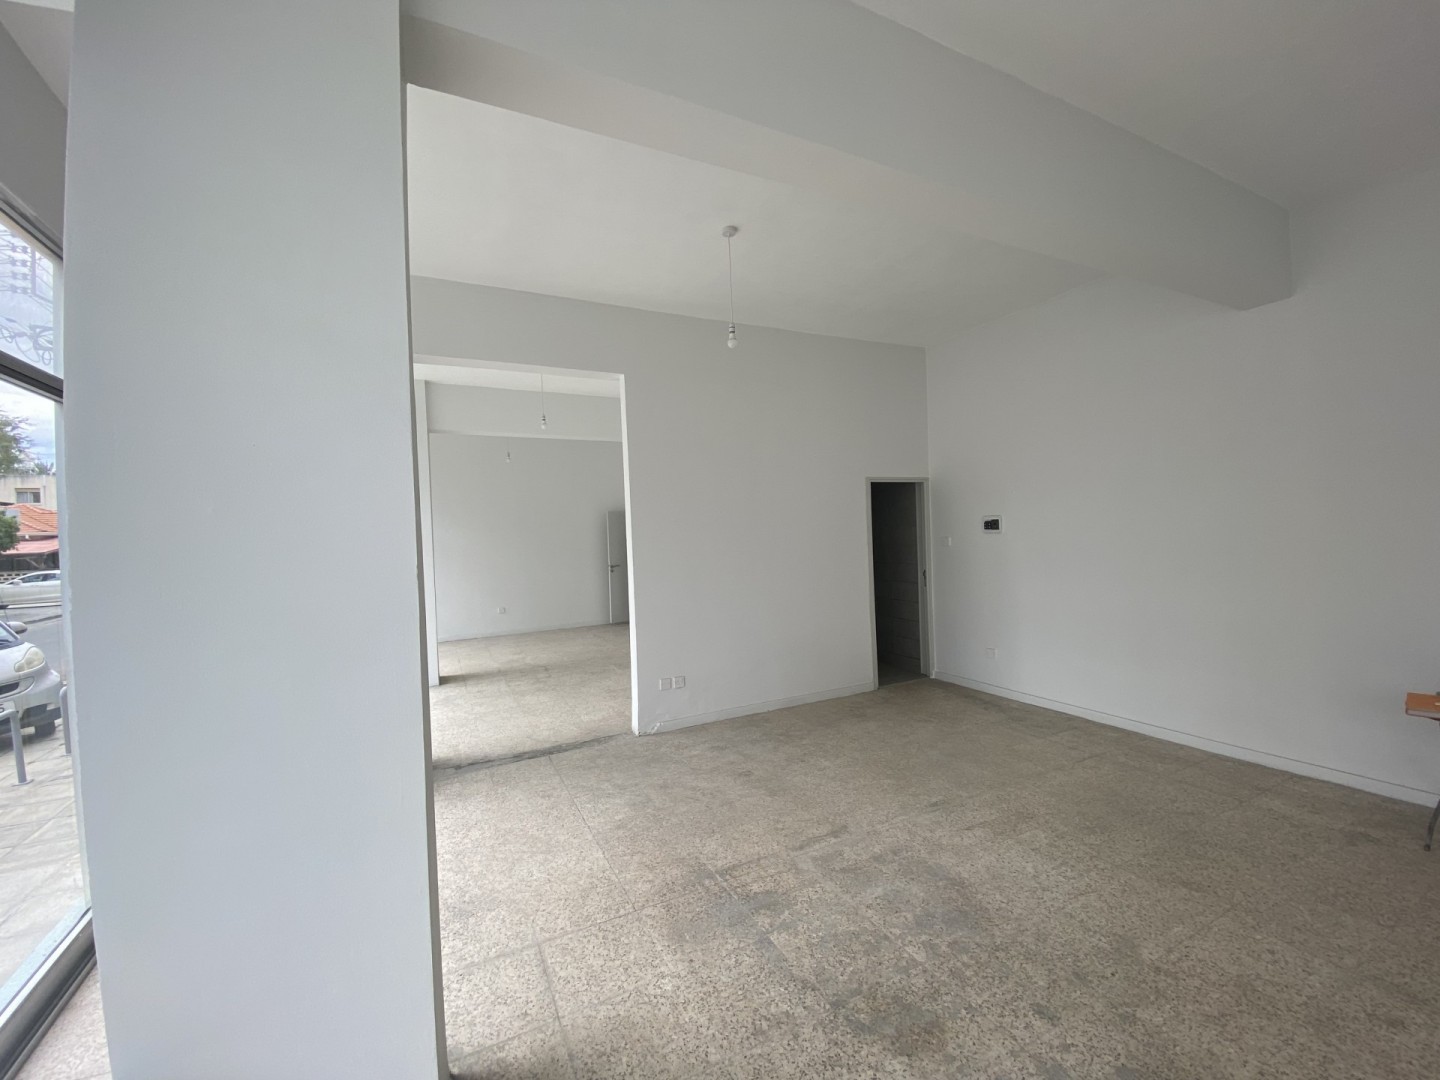 75m² Shop for Sale in Limassol – Apostolos Andreas